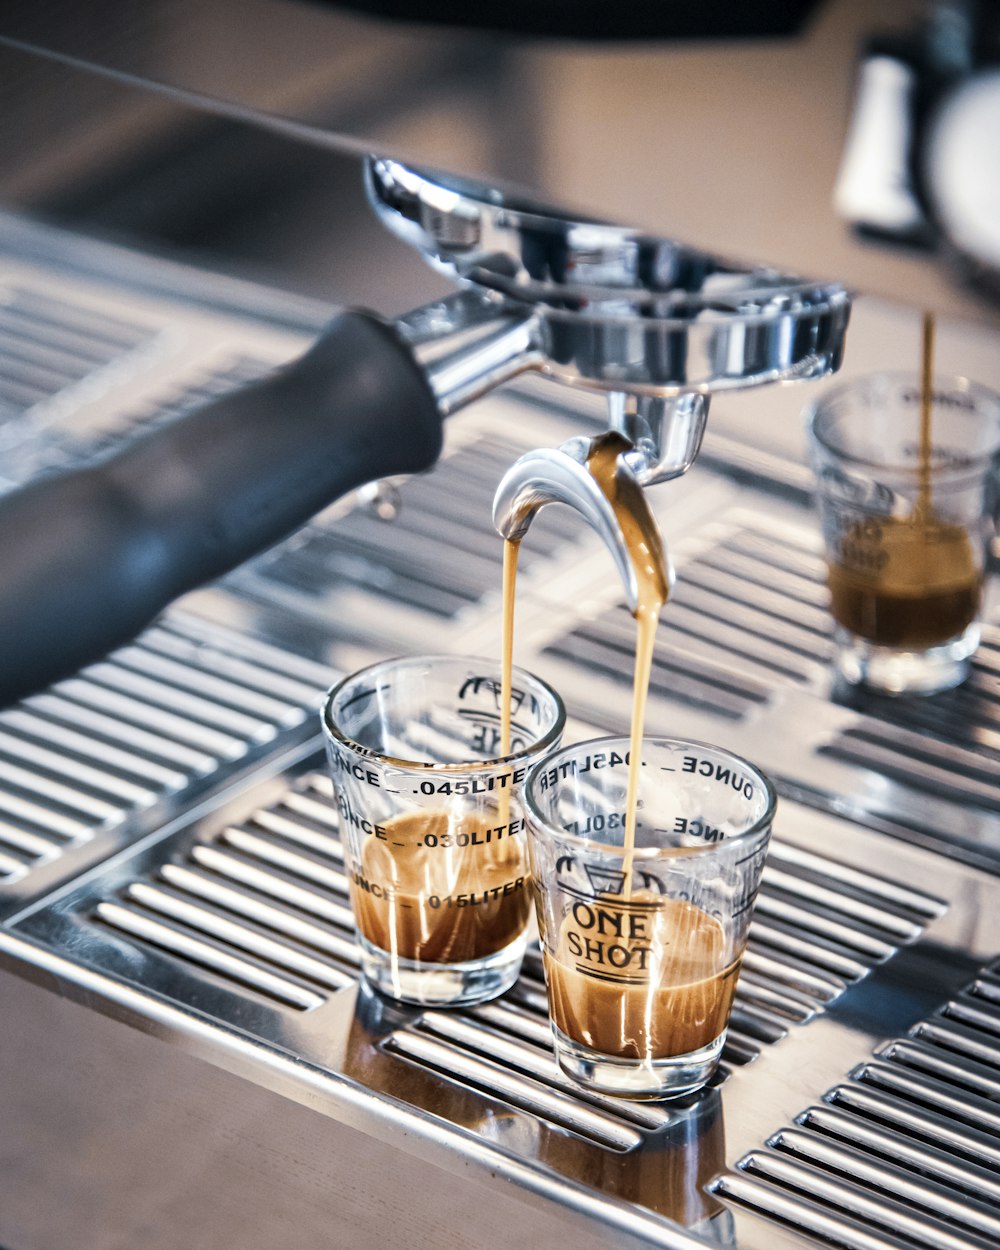 two shot glasses filled with coffee being poured into a espresso machine